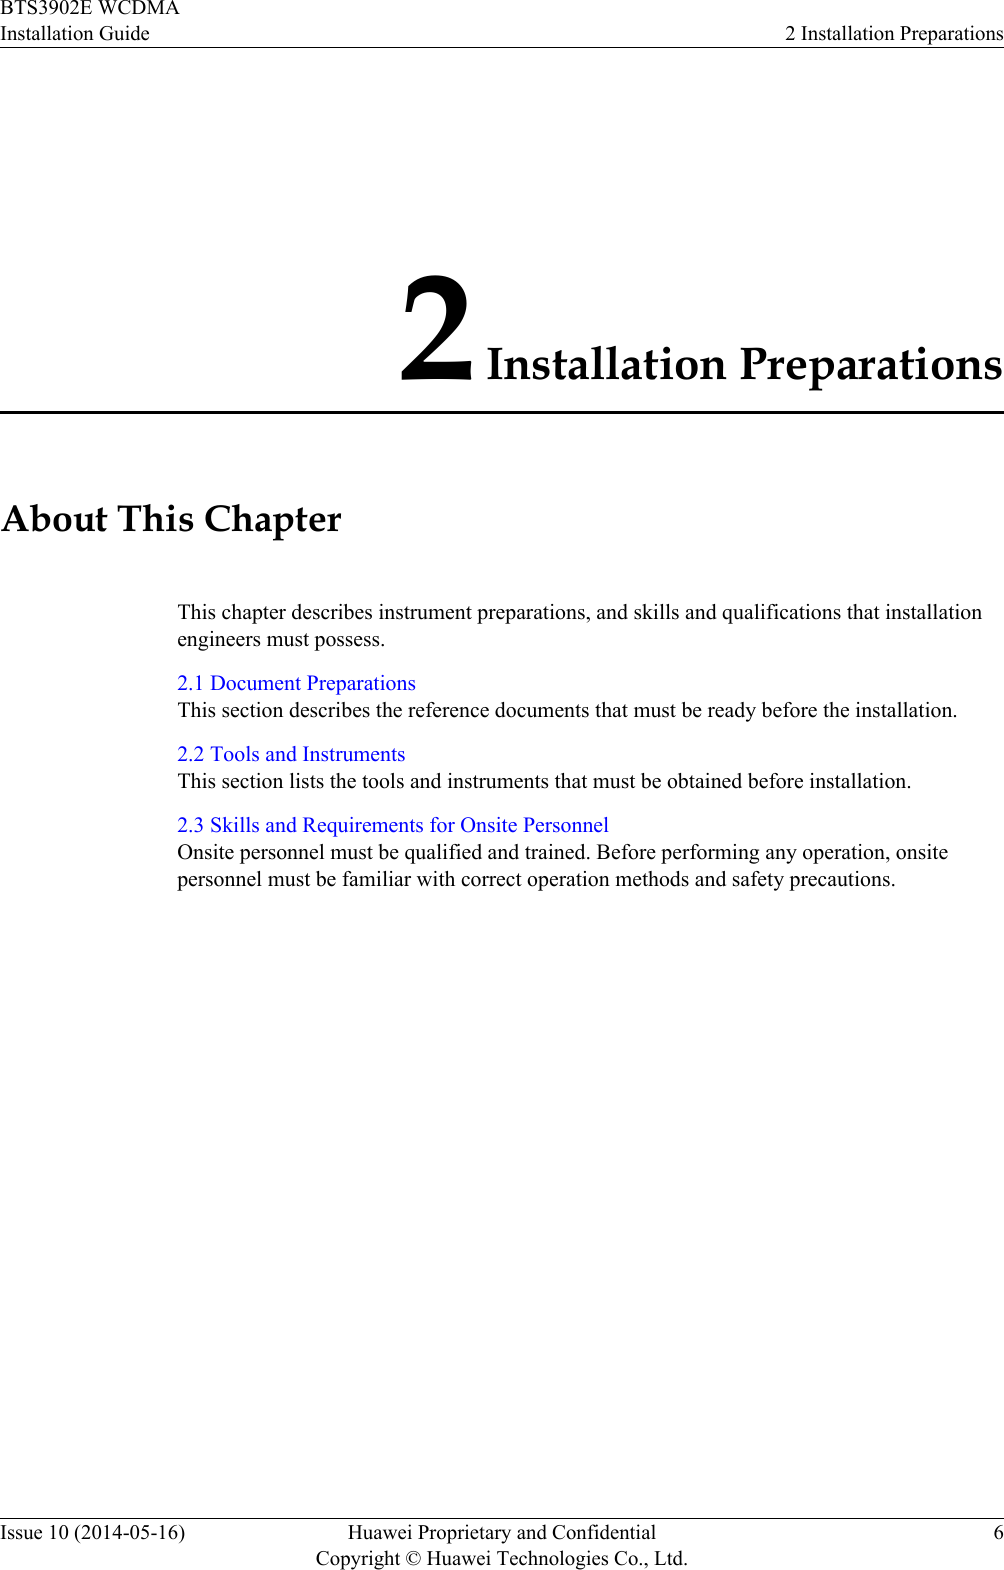 2 Installation PreparationsAbout This ChapterThis chapter describes instrument preparations, and skills and qualifications that installationengineers must possess.2.1 Document PreparationsThis section describes the reference documents that must be ready before the installation.2.2 Tools and InstrumentsThis section lists the tools and instruments that must be obtained before installation.2.3 Skills and Requirements for Onsite PersonnelOnsite personnel must be qualified and trained. Before performing any operation, onsitepersonnel must be familiar with correct operation methods and safety precautions.BTS3902E WCDMAInstallation Guide 2 Installation PreparationsIssue 10 (2014-05-16) Huawei Proprietary and ConfidentialCopyright © Huawei Technologies Co., Ltd.6